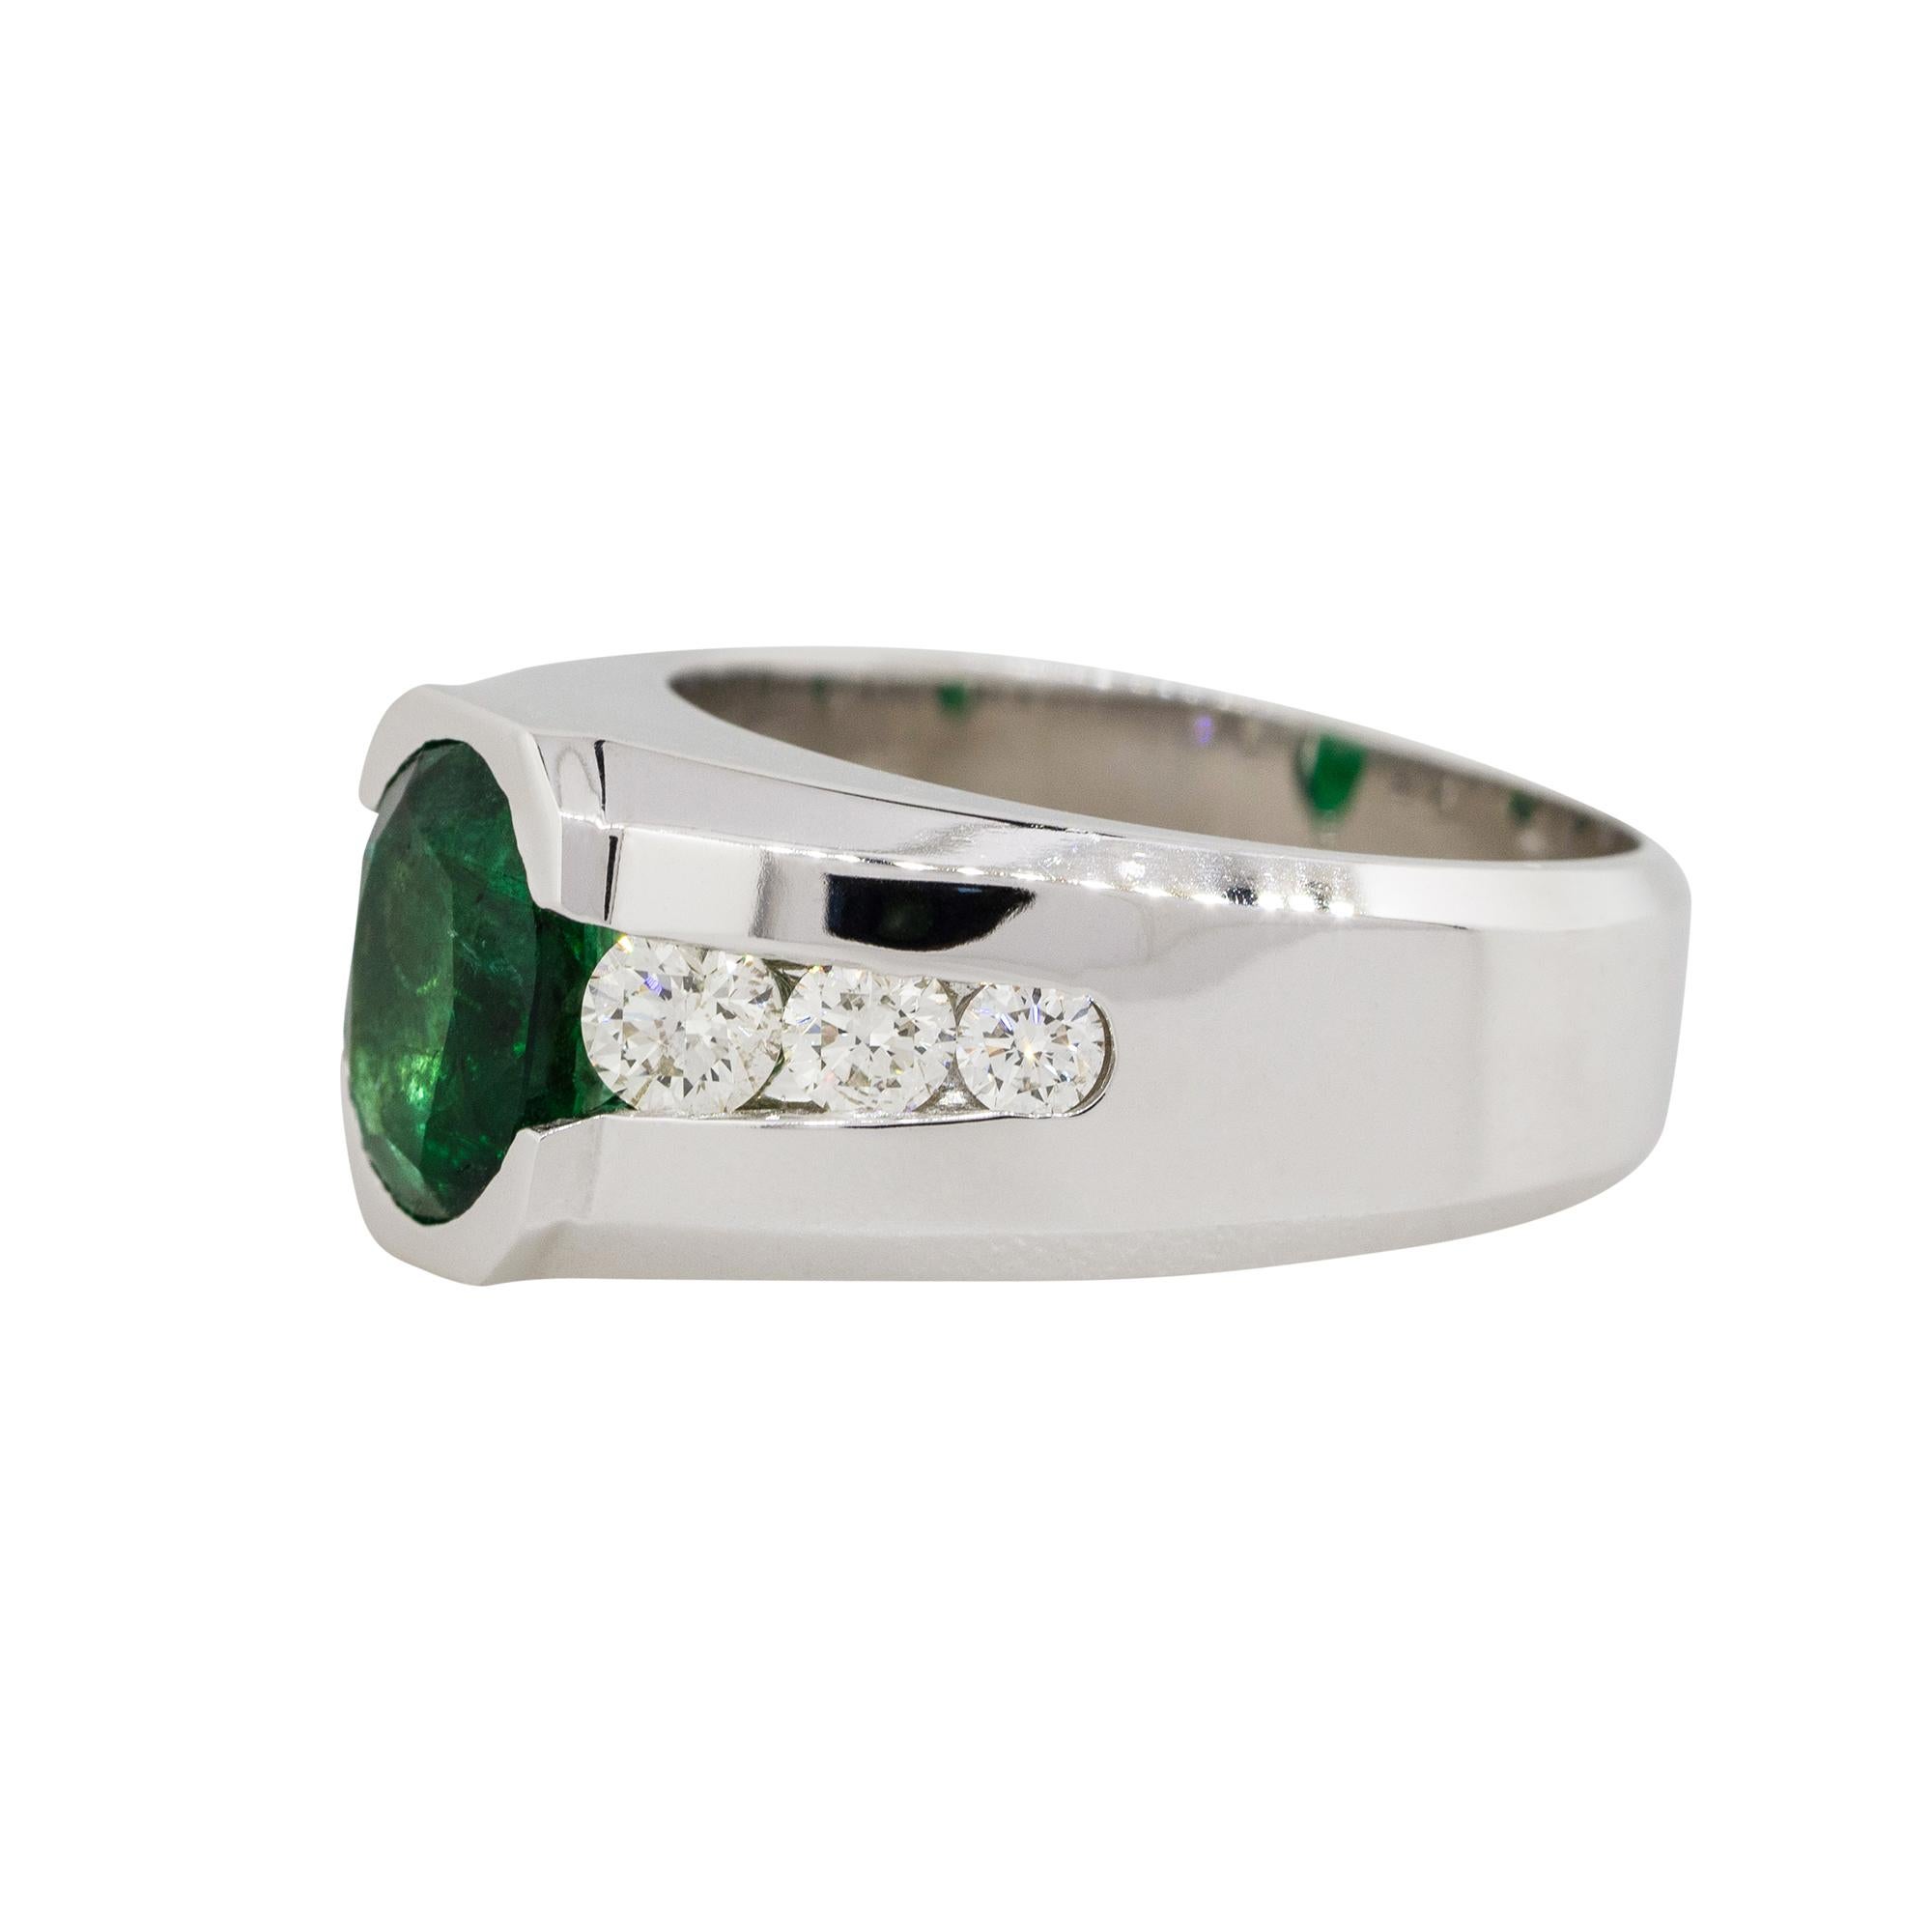 Material: 14k white gold
Diamond details: Approx. 1.20ctw of round cut Diamonds. Diamonds are G/H in color and VS in clarity
Gemstone Details: Approx. 3.05ctw ova cult Emerald gemstone
Size: 10.5
Total weight: 17.3g (11.1dwt)
Measurements: 0.95